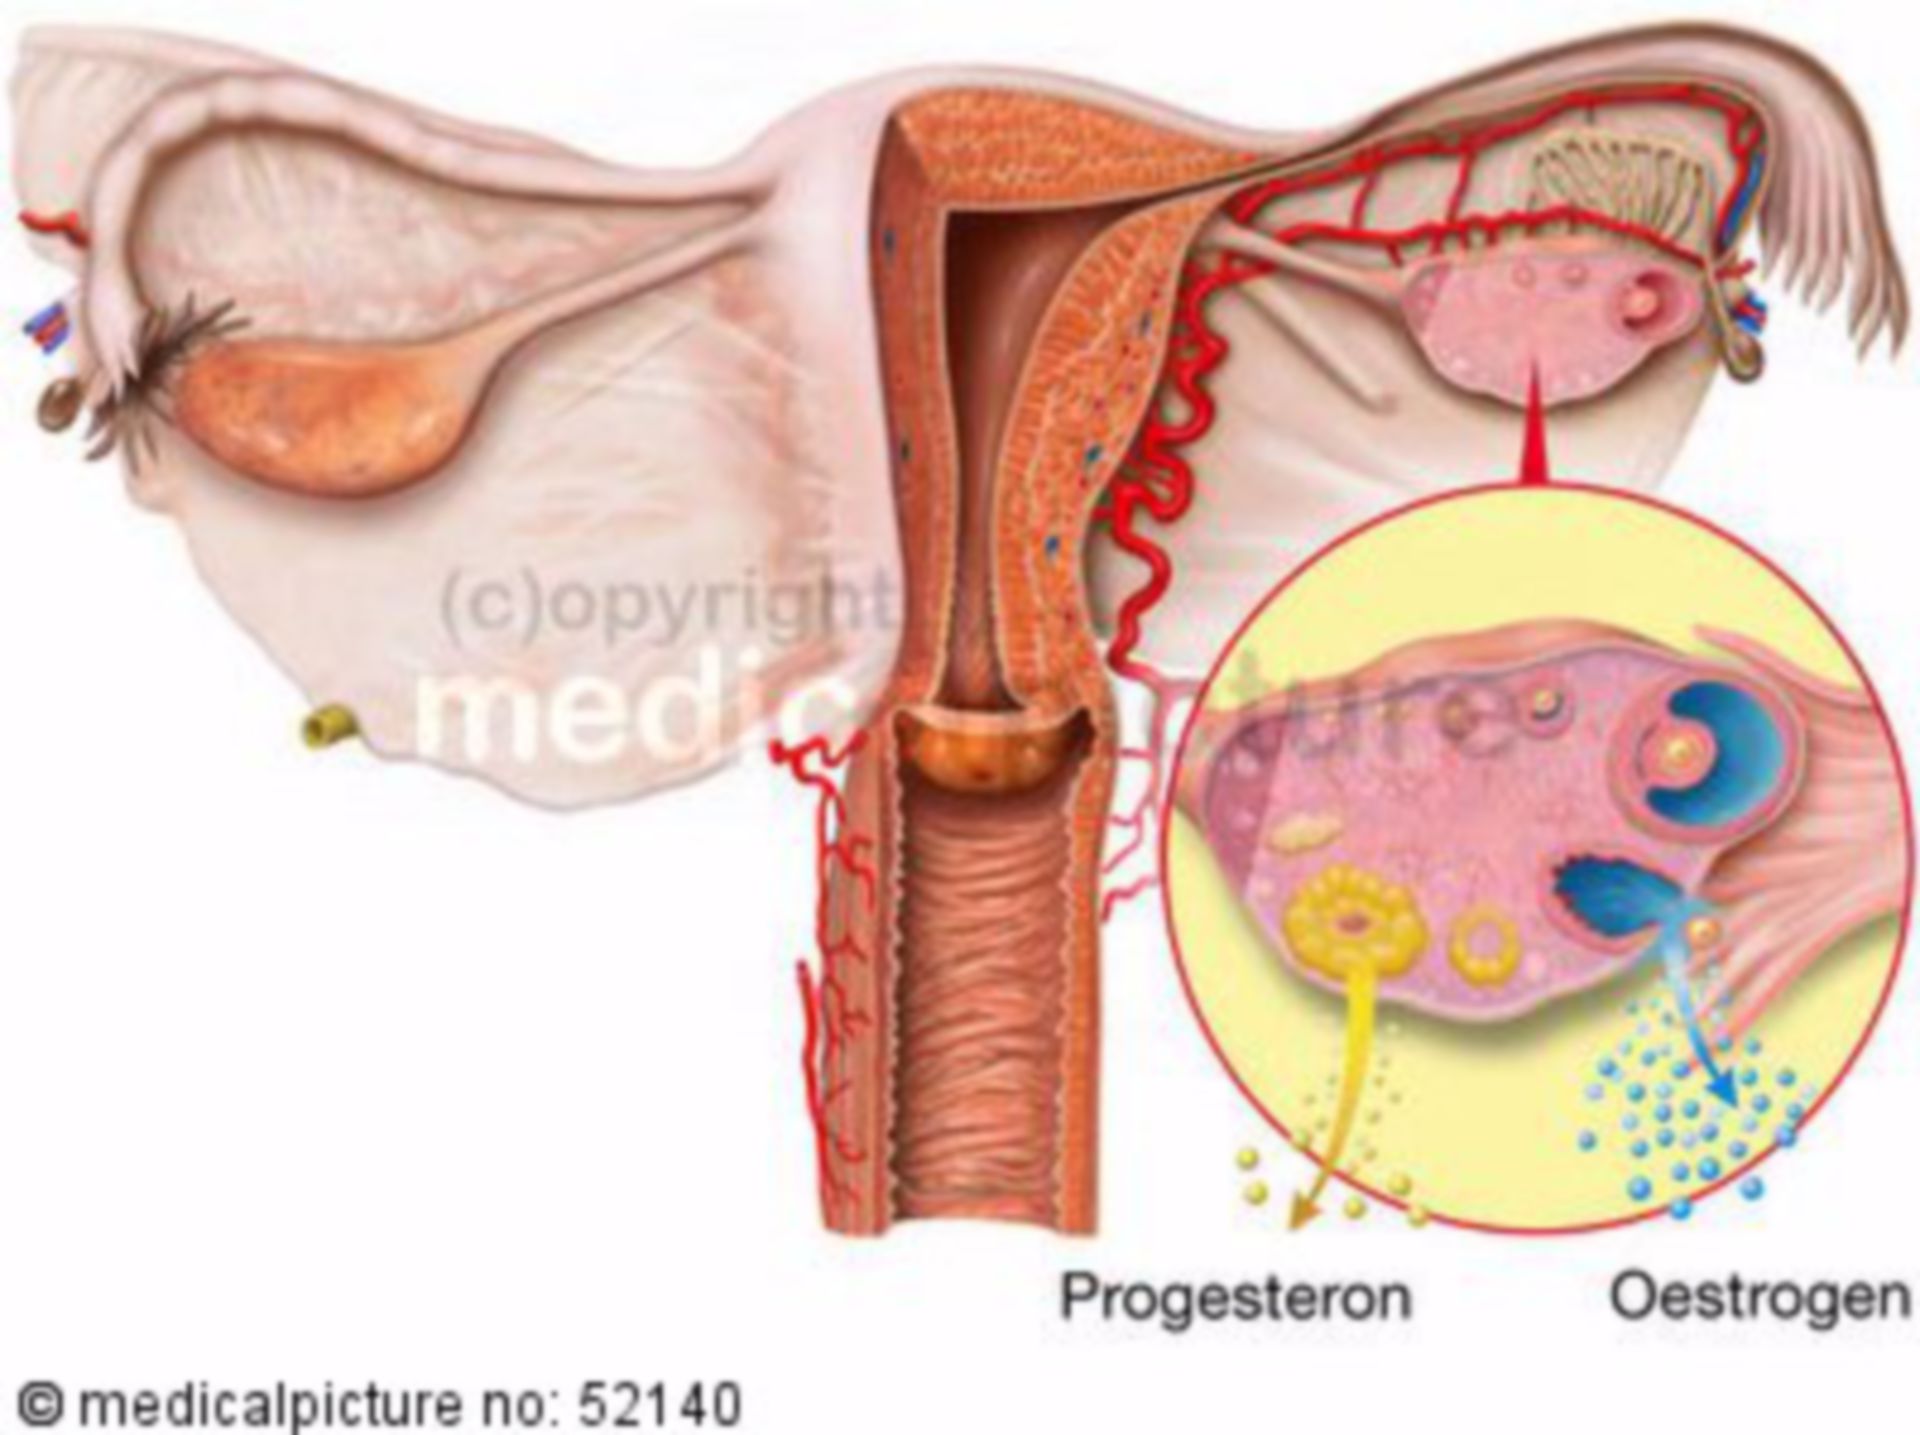 Hormone release in the ovary